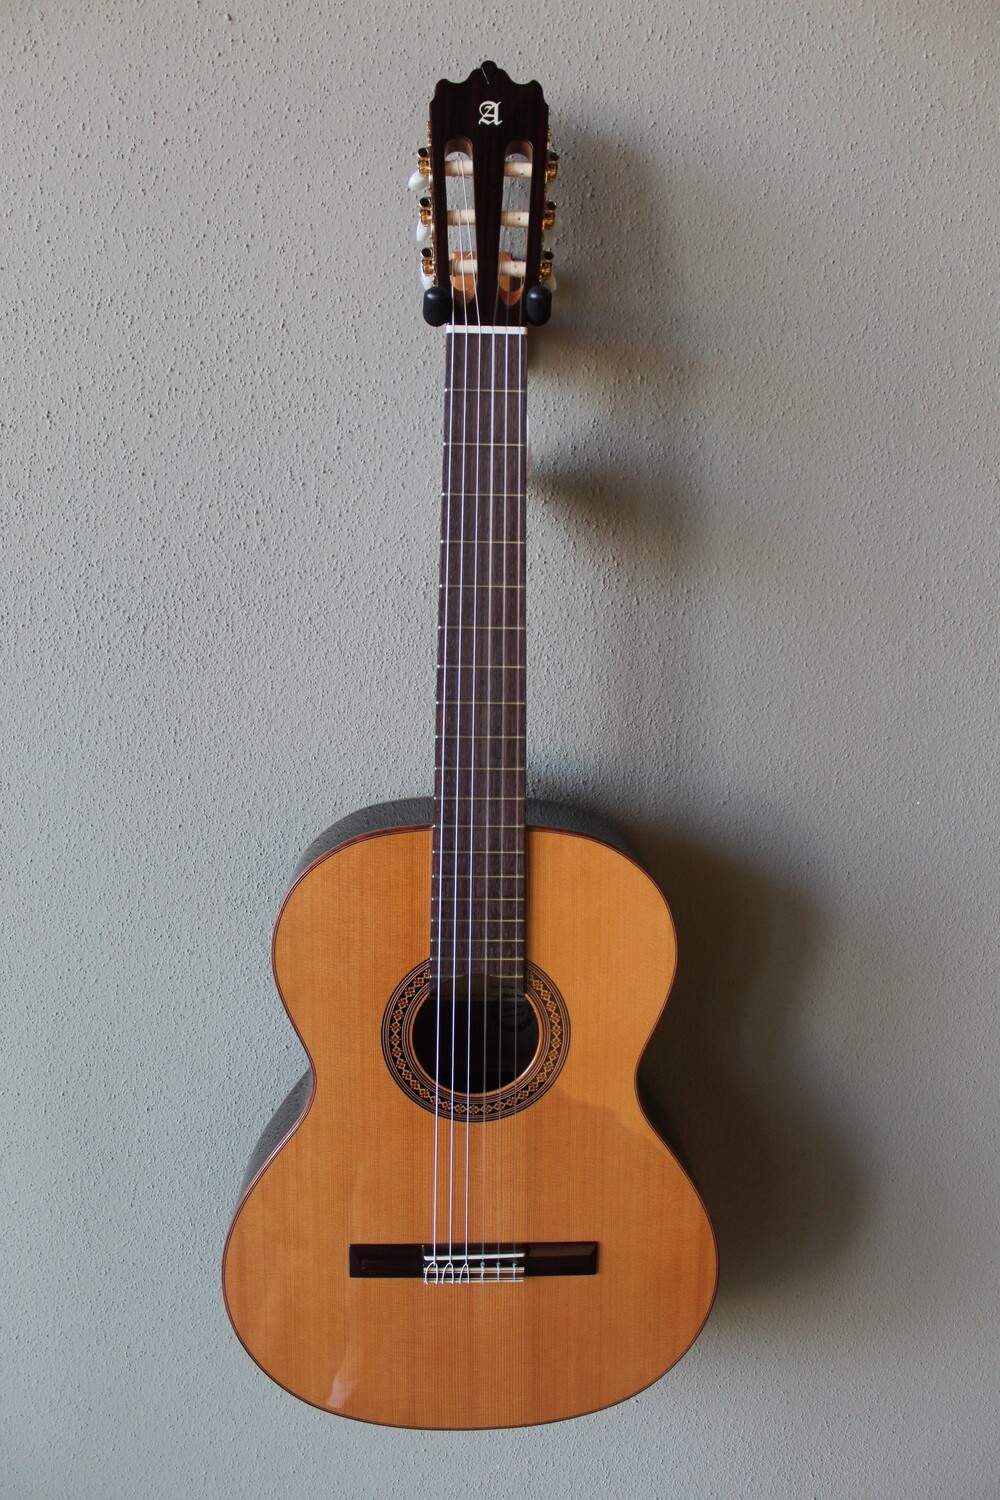 Alhambra 4Z Ziricote Classical Guitar - Made in Spain